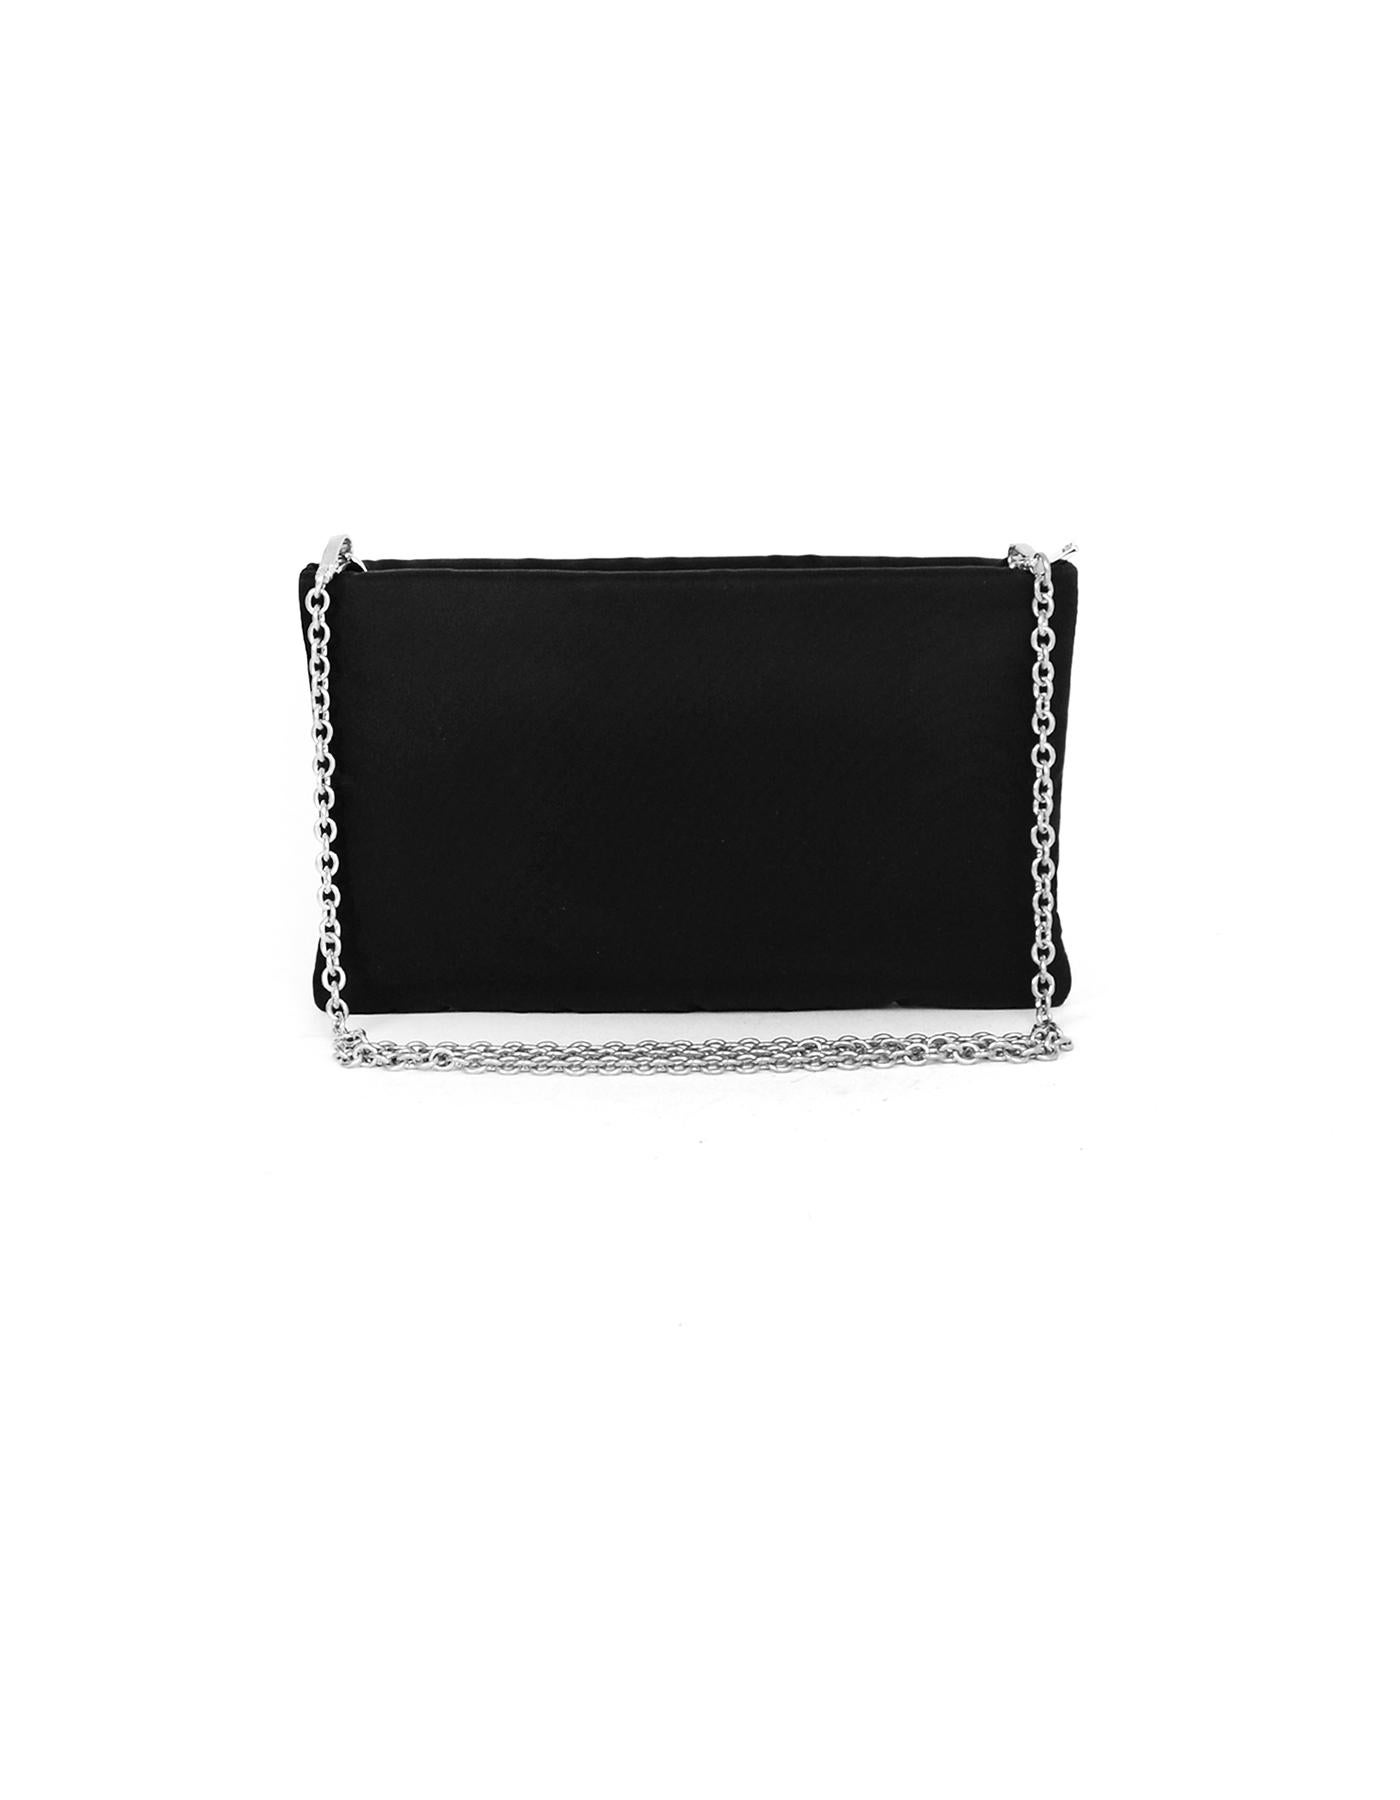 Prada 2019 Black Nylon Crystal Embellished Clutch/Crossbody Bag rt $1, 690 In Excellent Condition In New York, NY